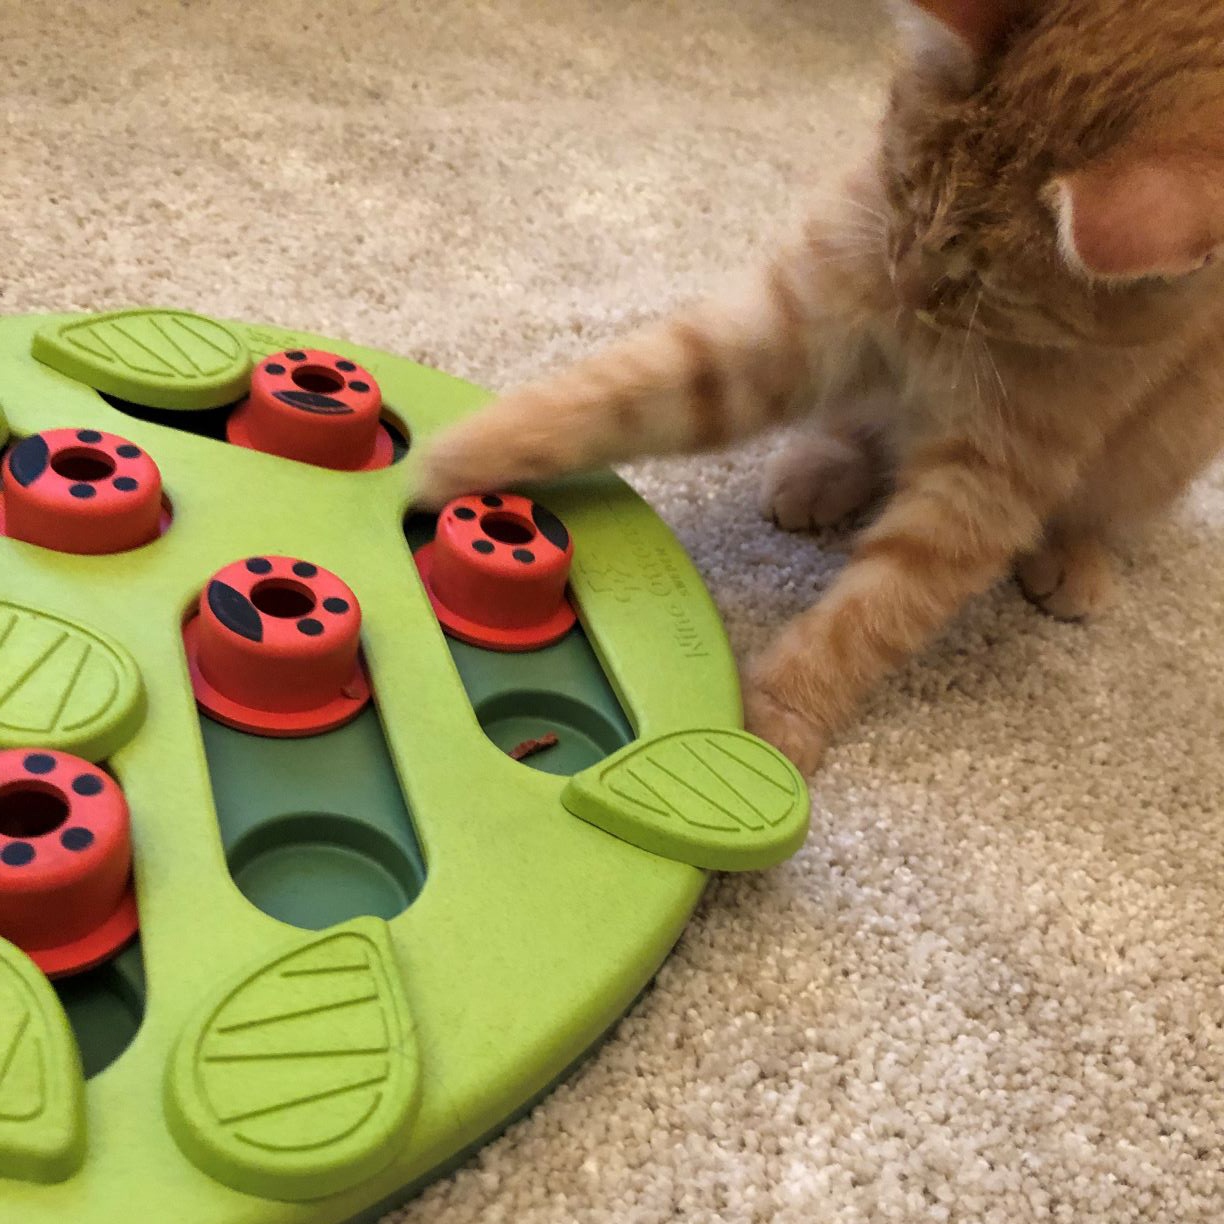 Buggin' Out Interactive Cat Puzzle (by Nina Ottosson) – FOR THE CATTOS